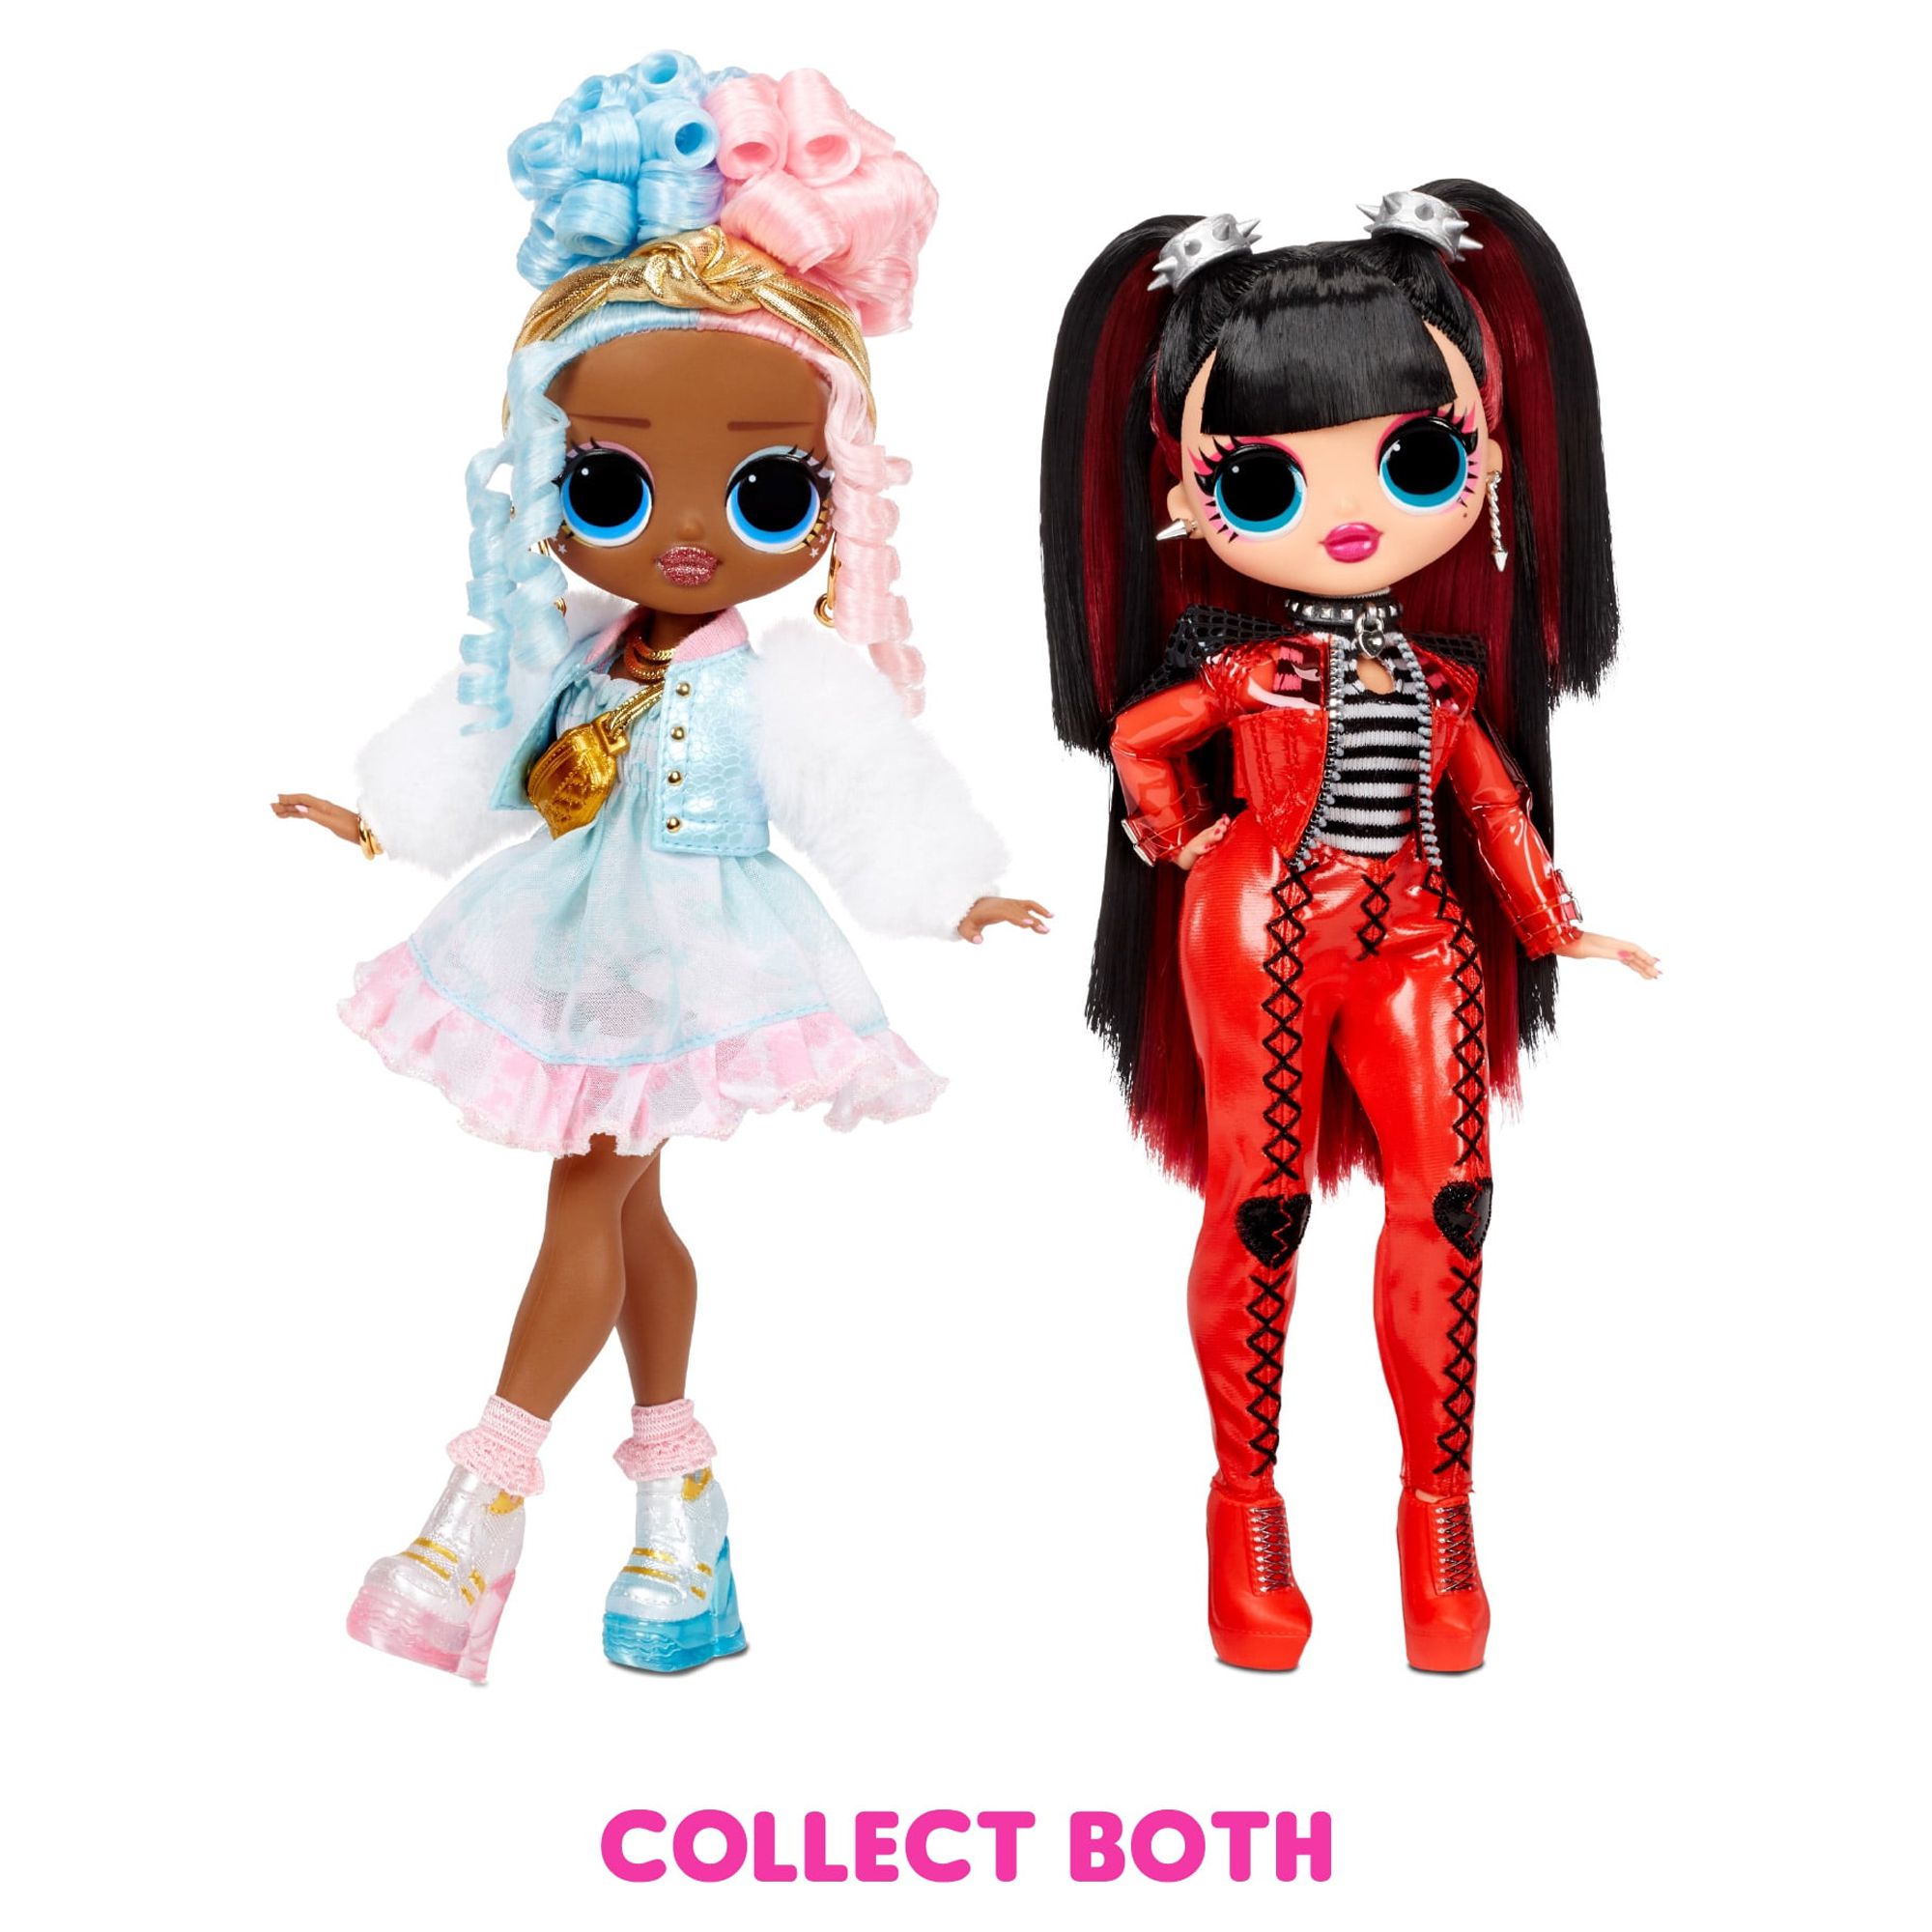 LOL Surprise OMG Sweets Fashion Doll - Dress Up Doll Set with 20 Surprises for Girls and Kids 4+ - image 8 of 8